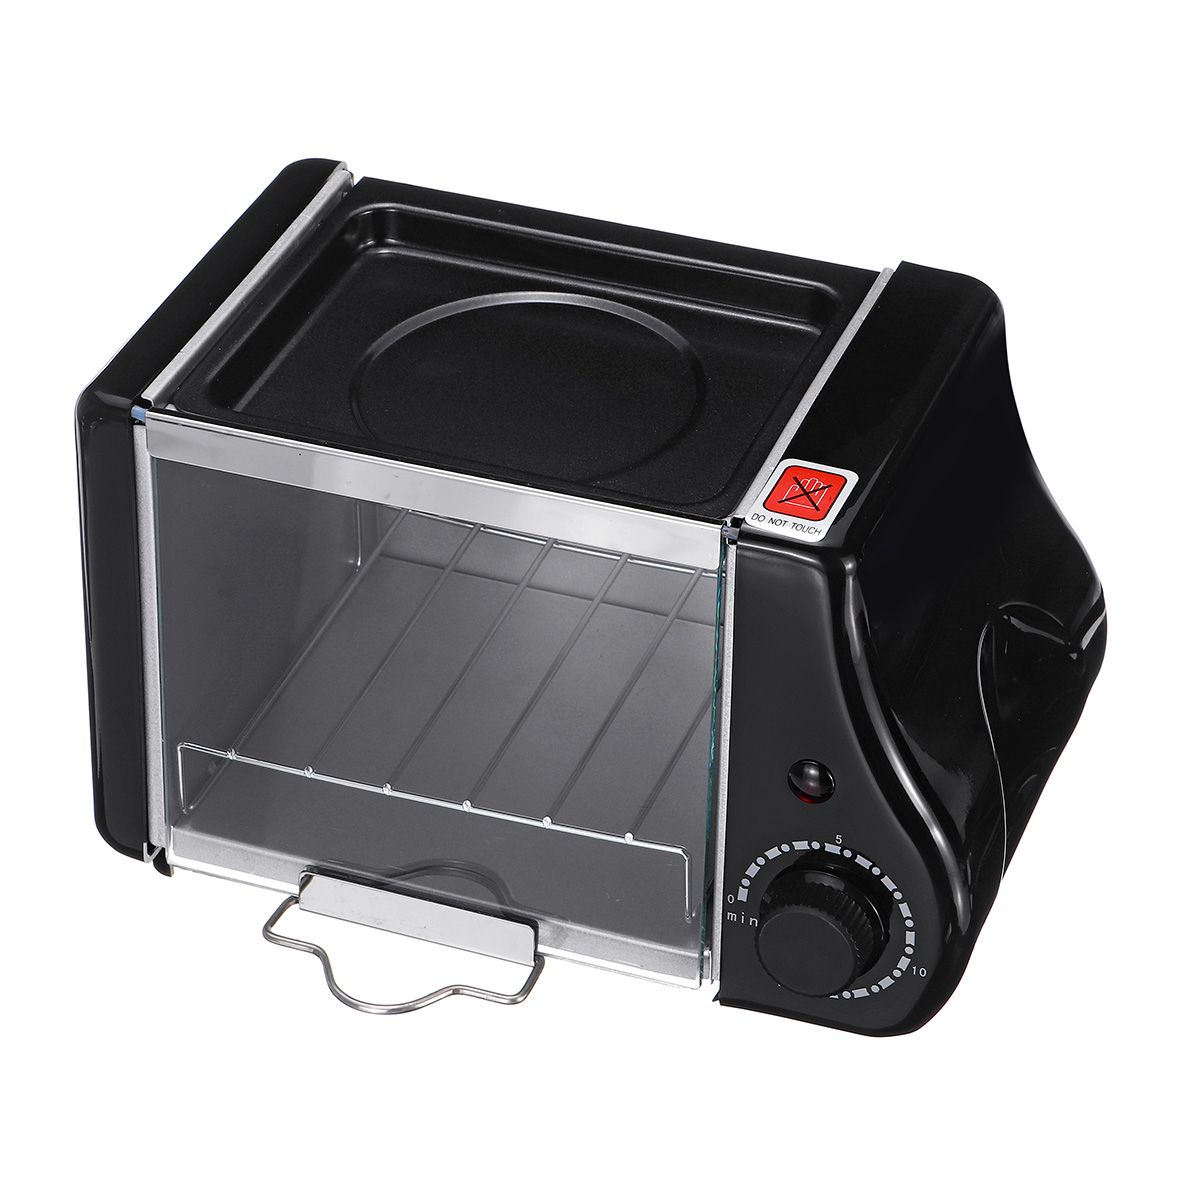 15L-Electric-Mini-Oven-Toaster-Bread-Baking-Frying-Pan-Eggs-Omelette-Kitchen-1536047